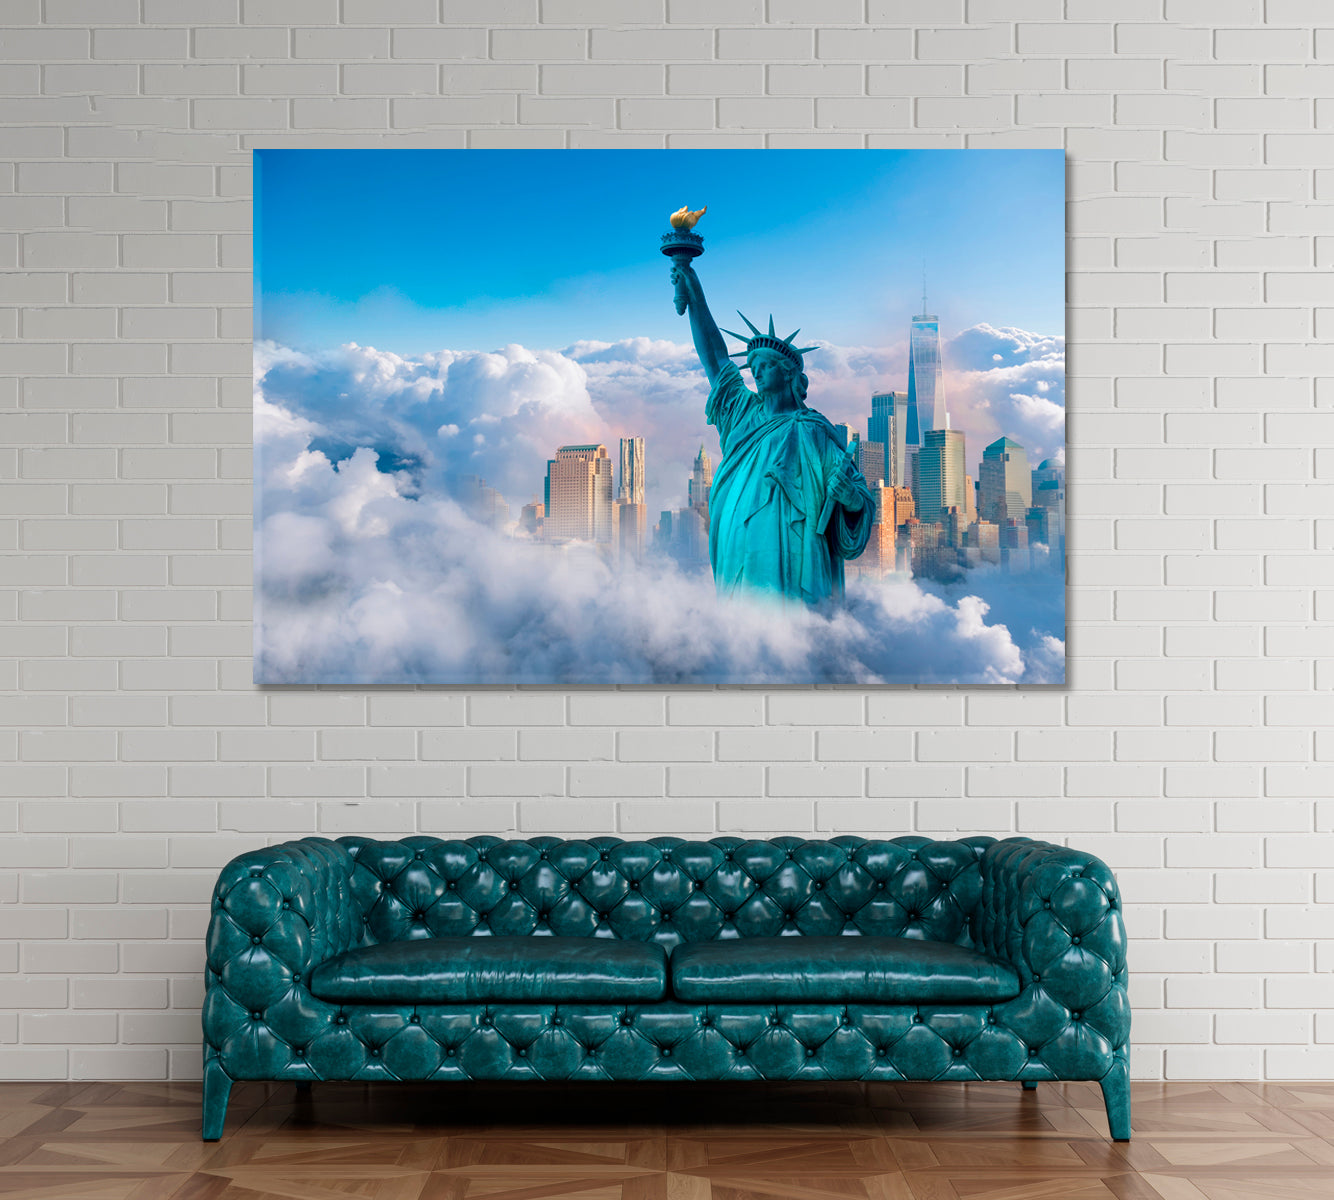 New York City with Statue of Liberty in Clouds Canvas Print ArtLexy 1 Panel 24"x16" inches 